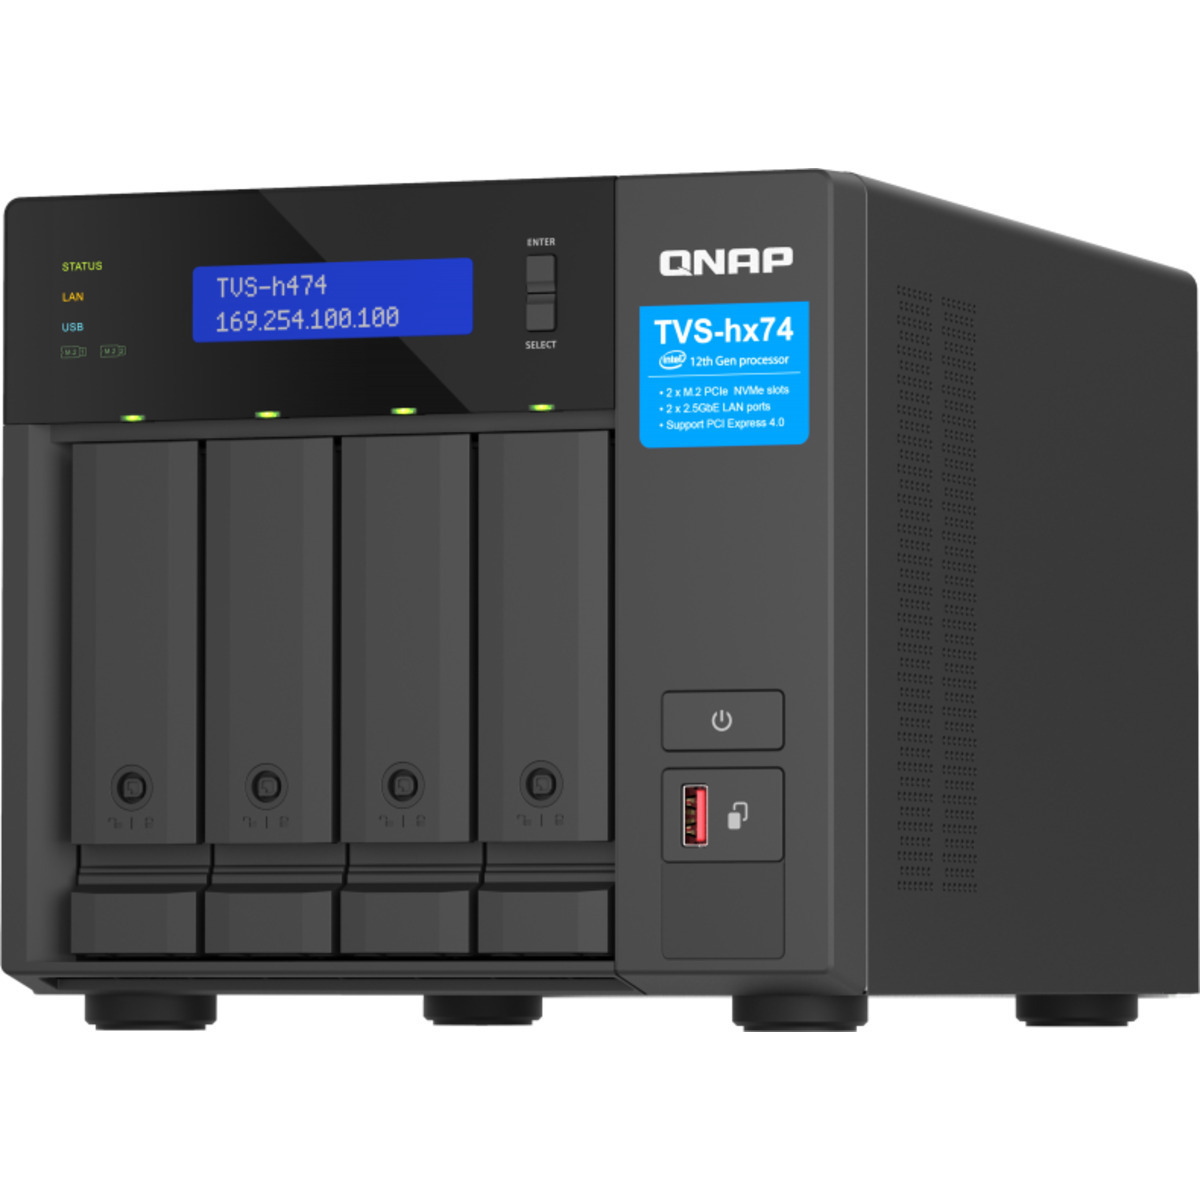 buy QNAP TVS-h474 Pentium Gold 48tb Desktop NAS - Network Attached Storage Device 4x12000gb Seagate IronWolf Pro ST12000NT001 3.5 7200rpm SATA 6Gb/s HDD NAS Class Drives Installed - Burn-In Tested - ON SALE - FREE RAM UPGRADE - nas headquarters buy network attached storage server device das new raid-5 free shipping usa spring sale TVS-h474 Pentium Gold